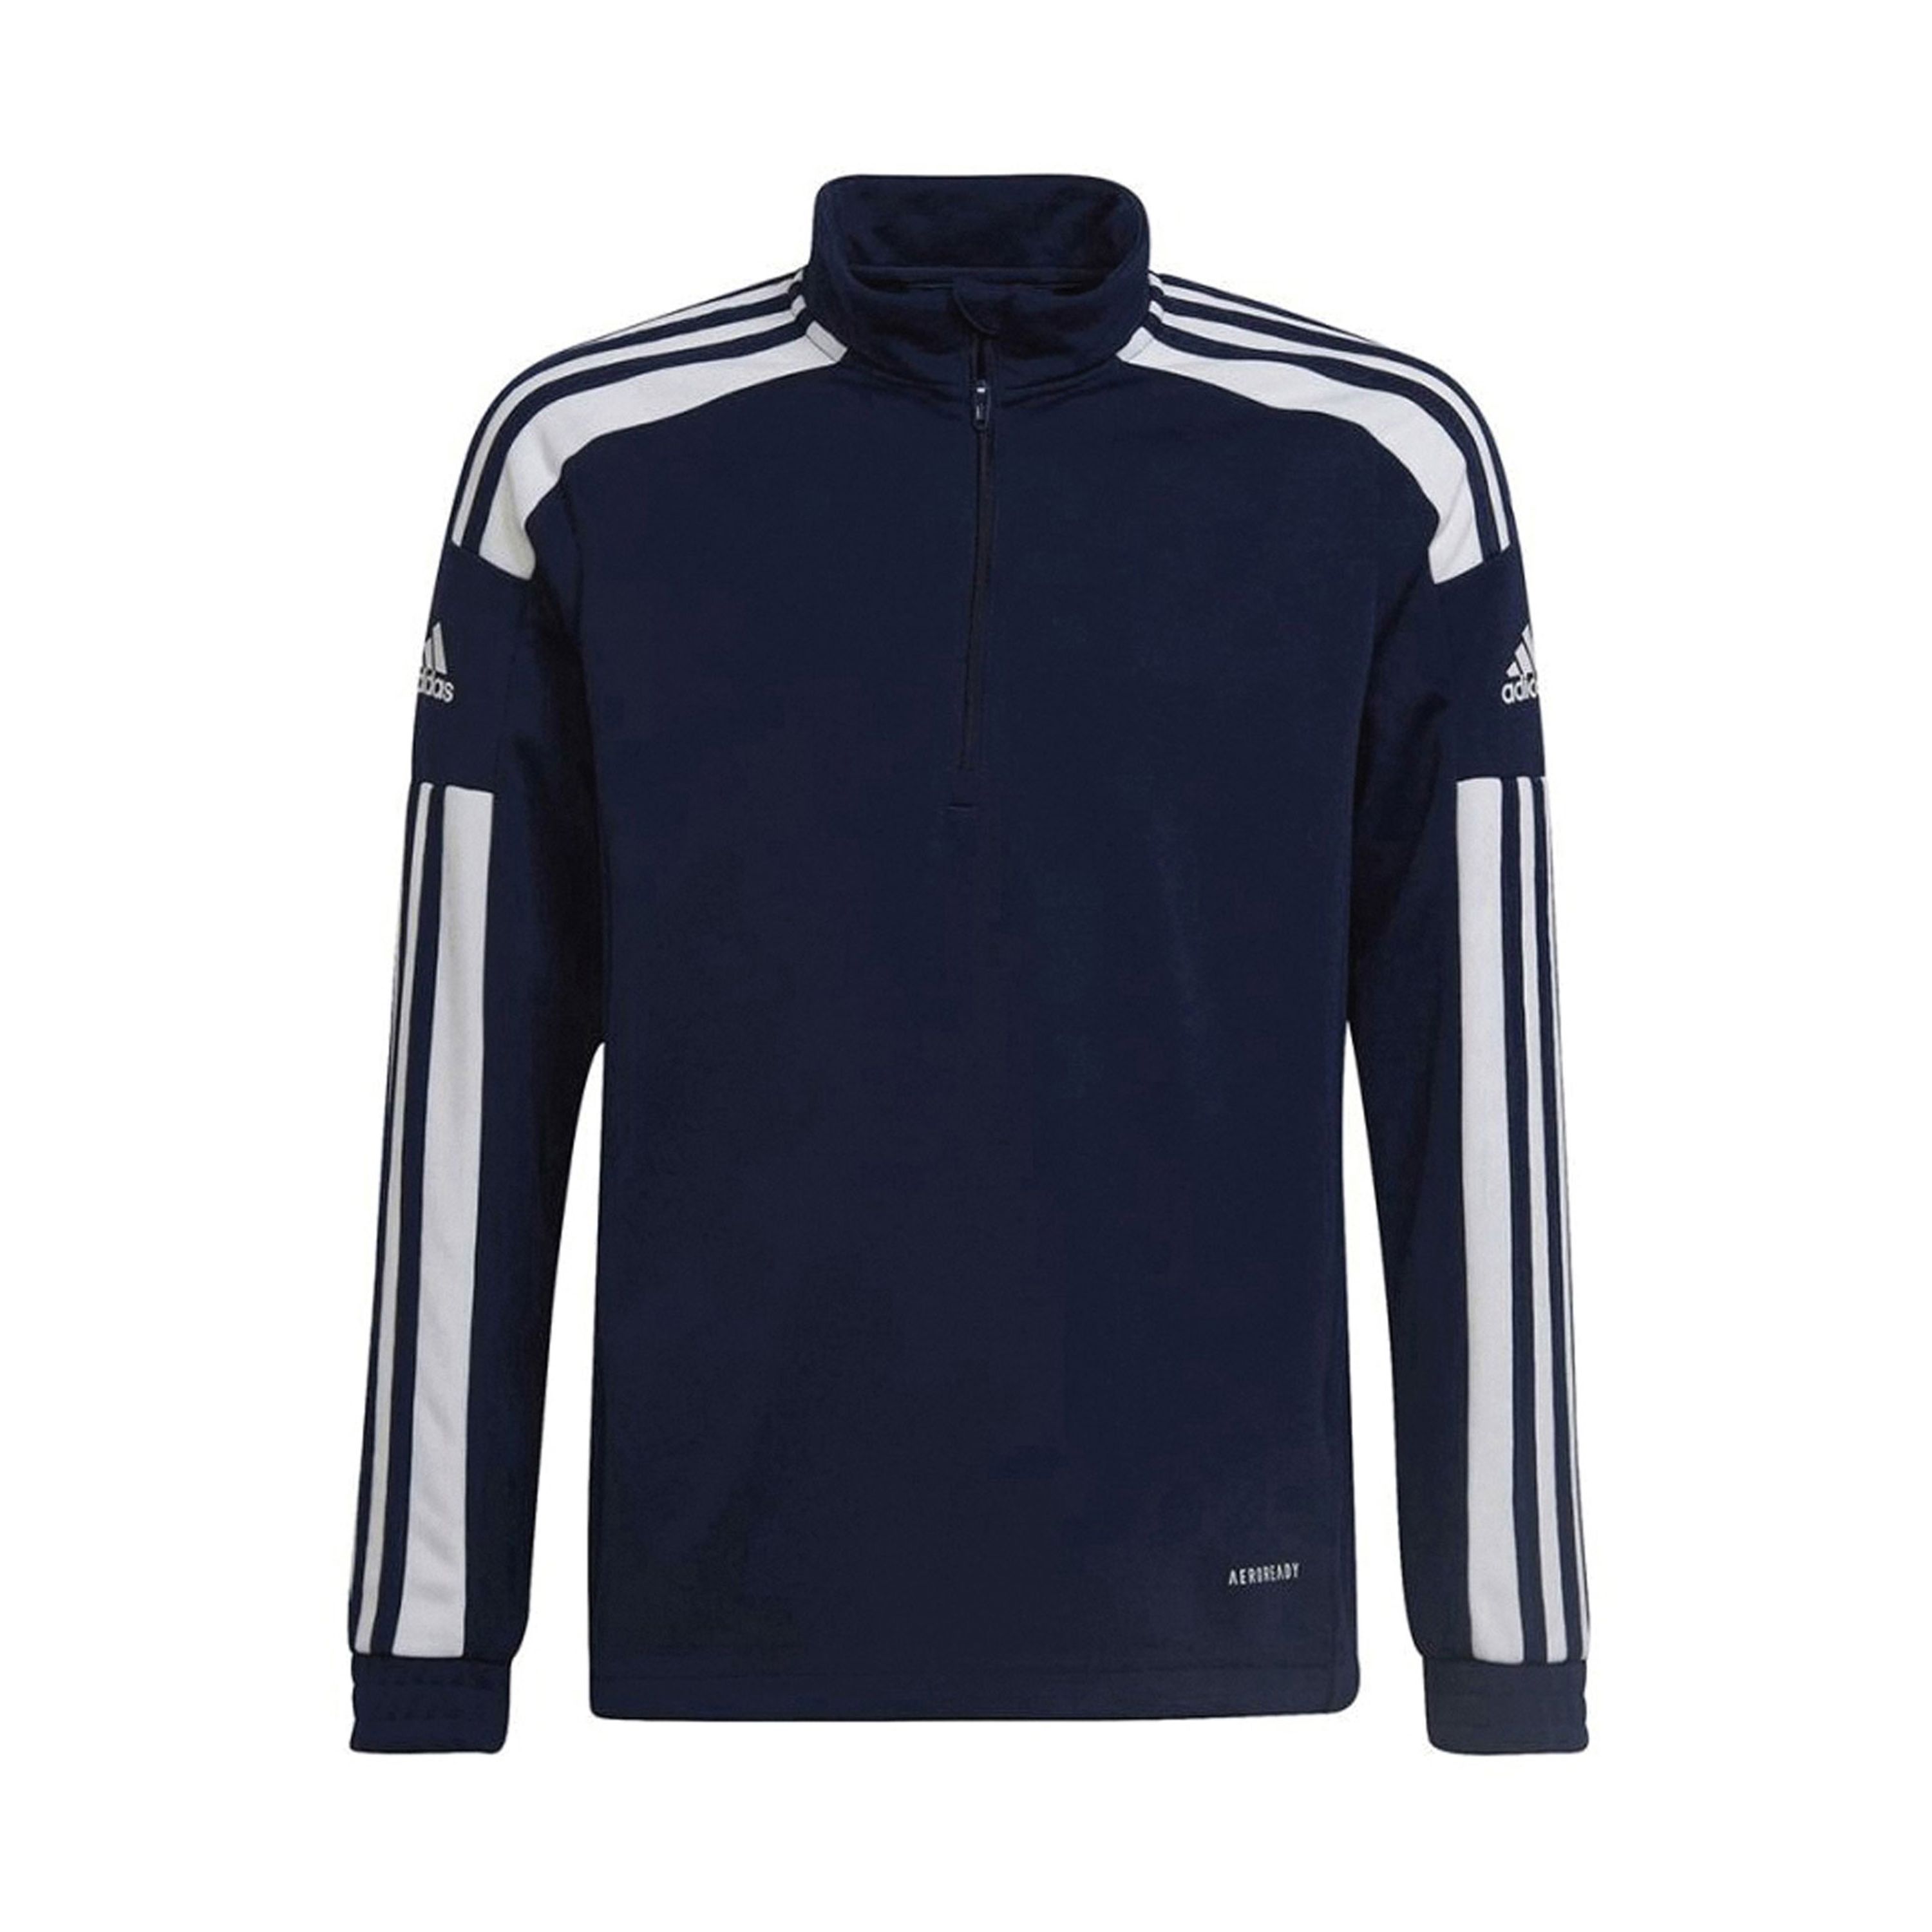 Adidas Perfor ce Junior sportpully donkerblauw wit Sportsweater Gerecycled polyester Opstaande kraag 164